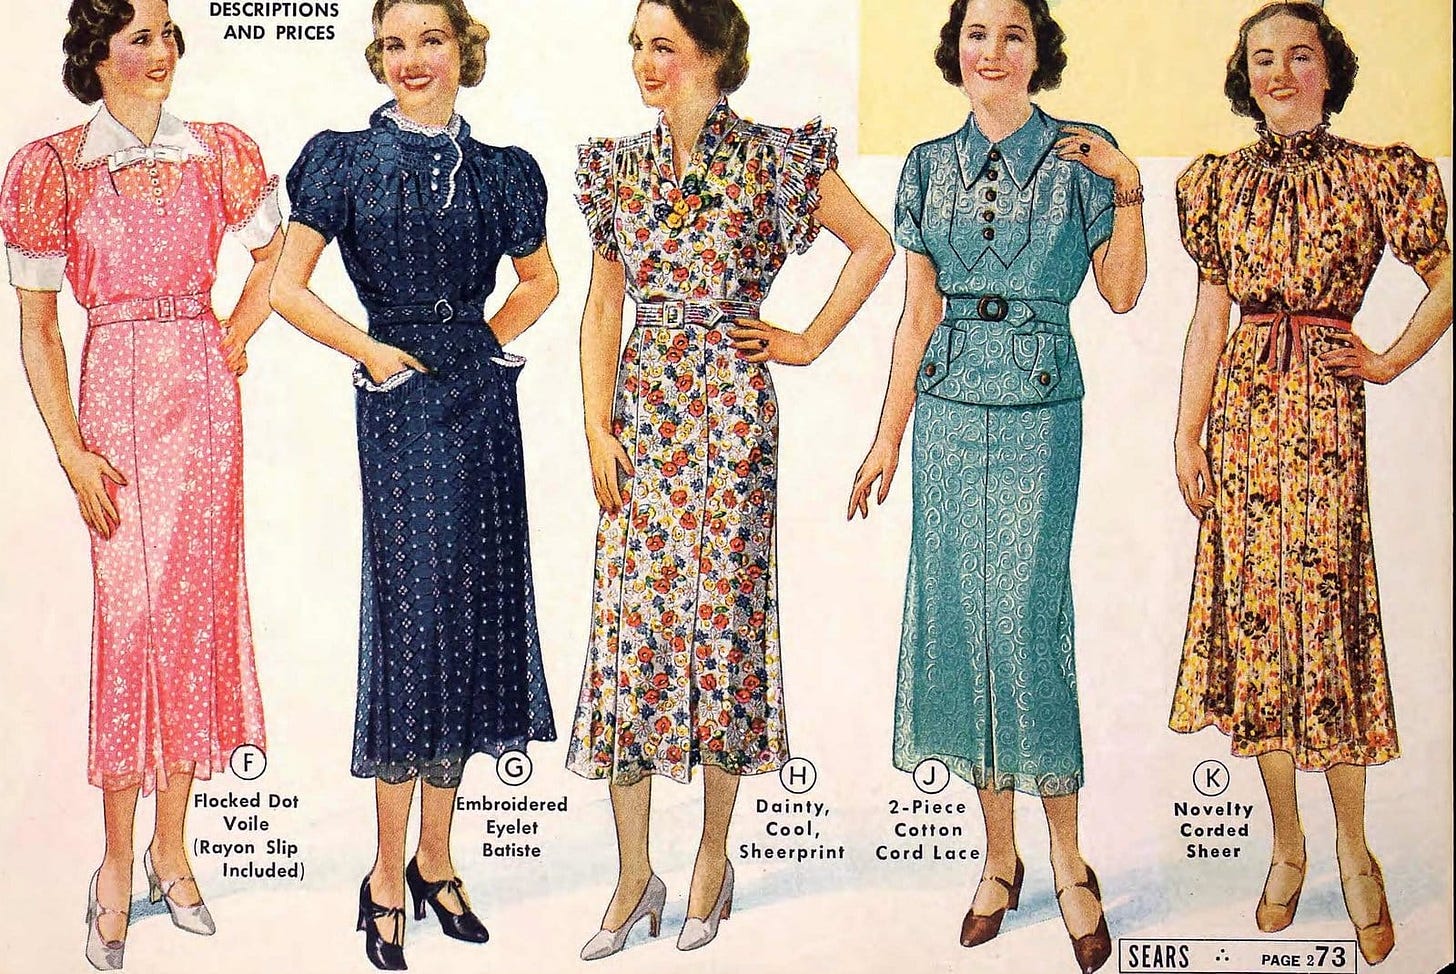 Vintage 1930s dresses from Sears in 1937 (1)